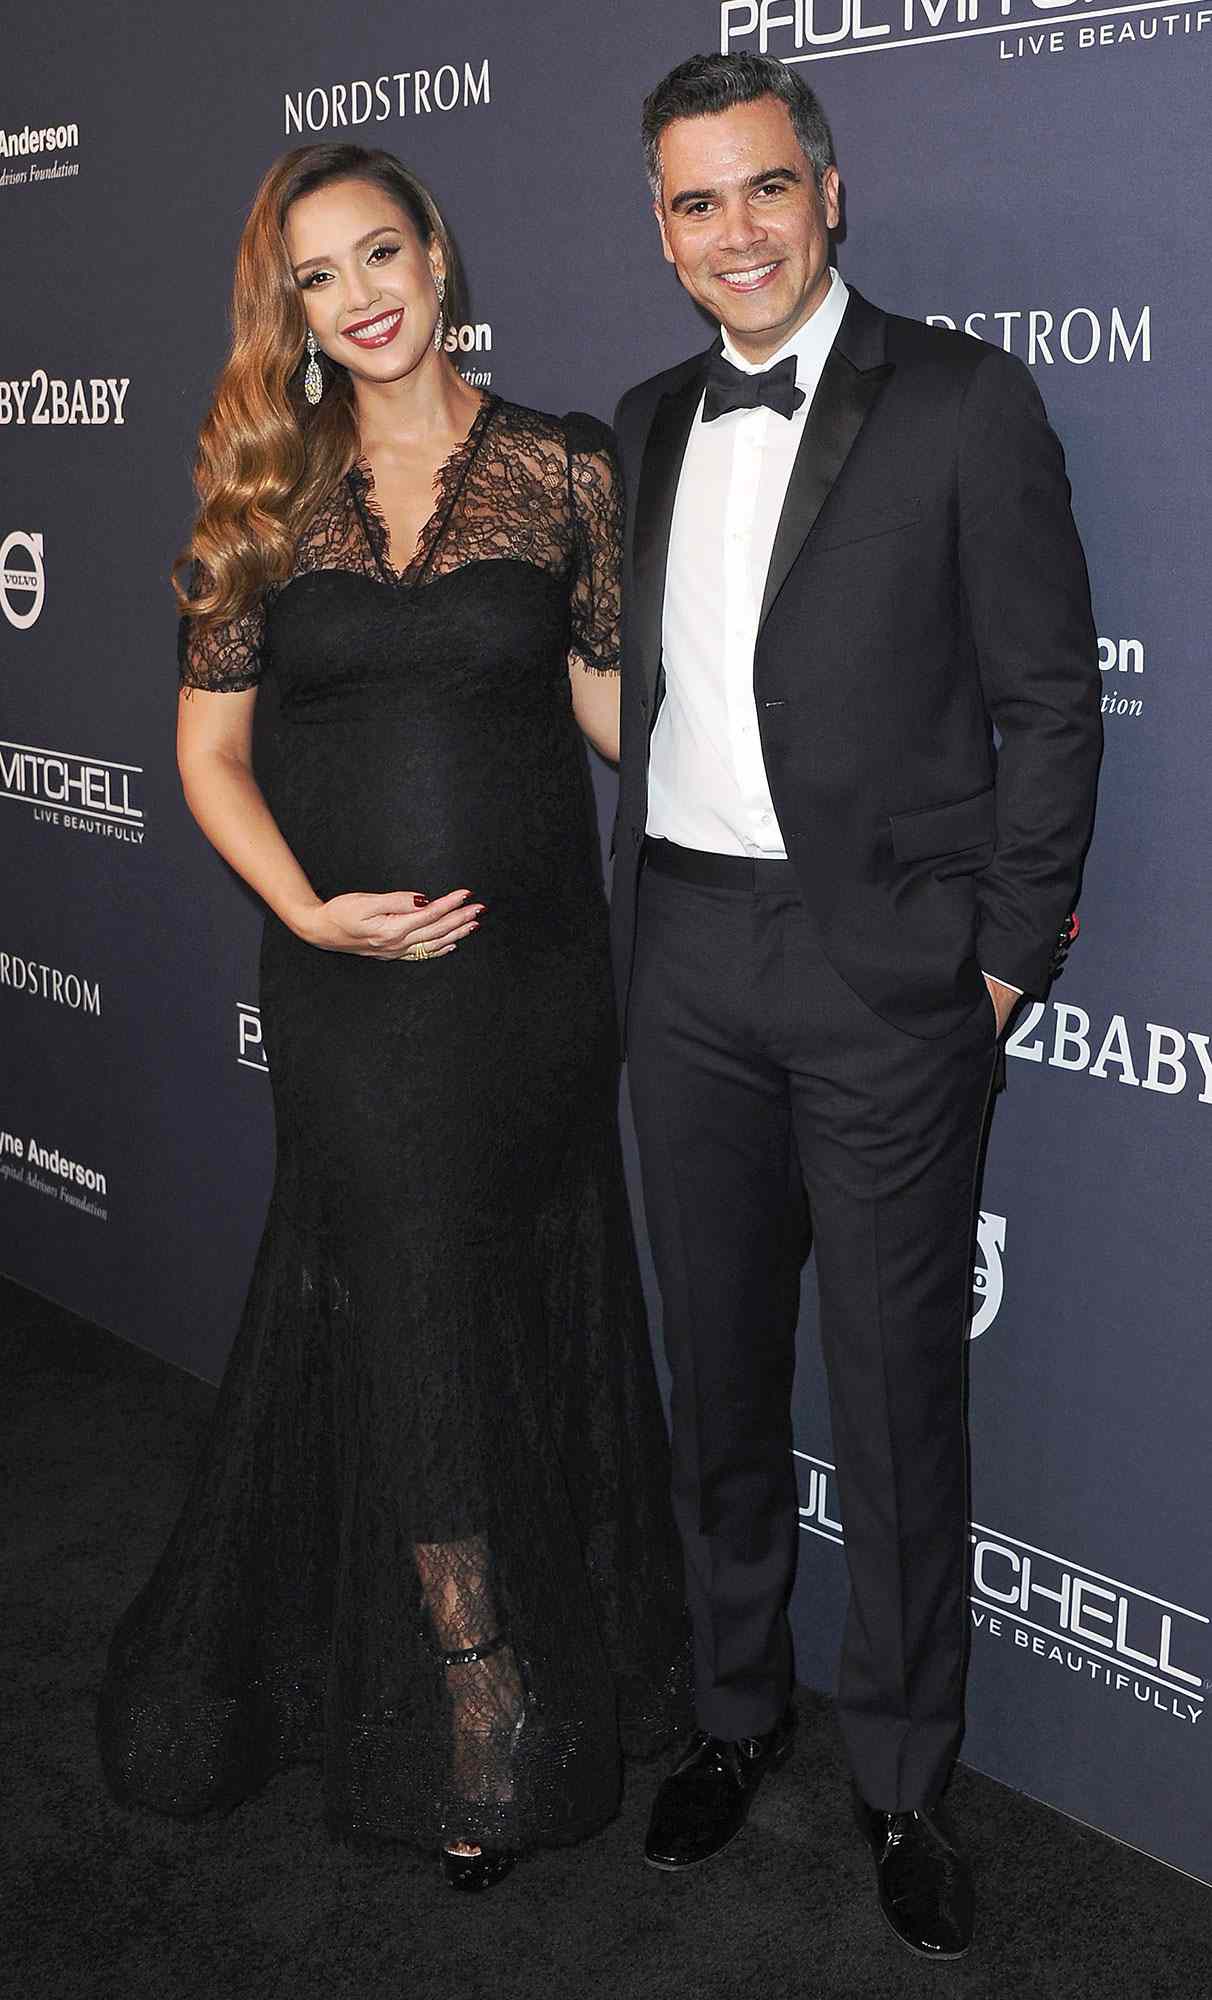 Jessica Alba And Cash Warren Welcome Son Hayes Alba People Com Jessica alba announced her third child on the way in july, revealing in october that she and husband cash warren would be expecting their first son. https people com parents jessica alba cash warren welcome third child son hayes